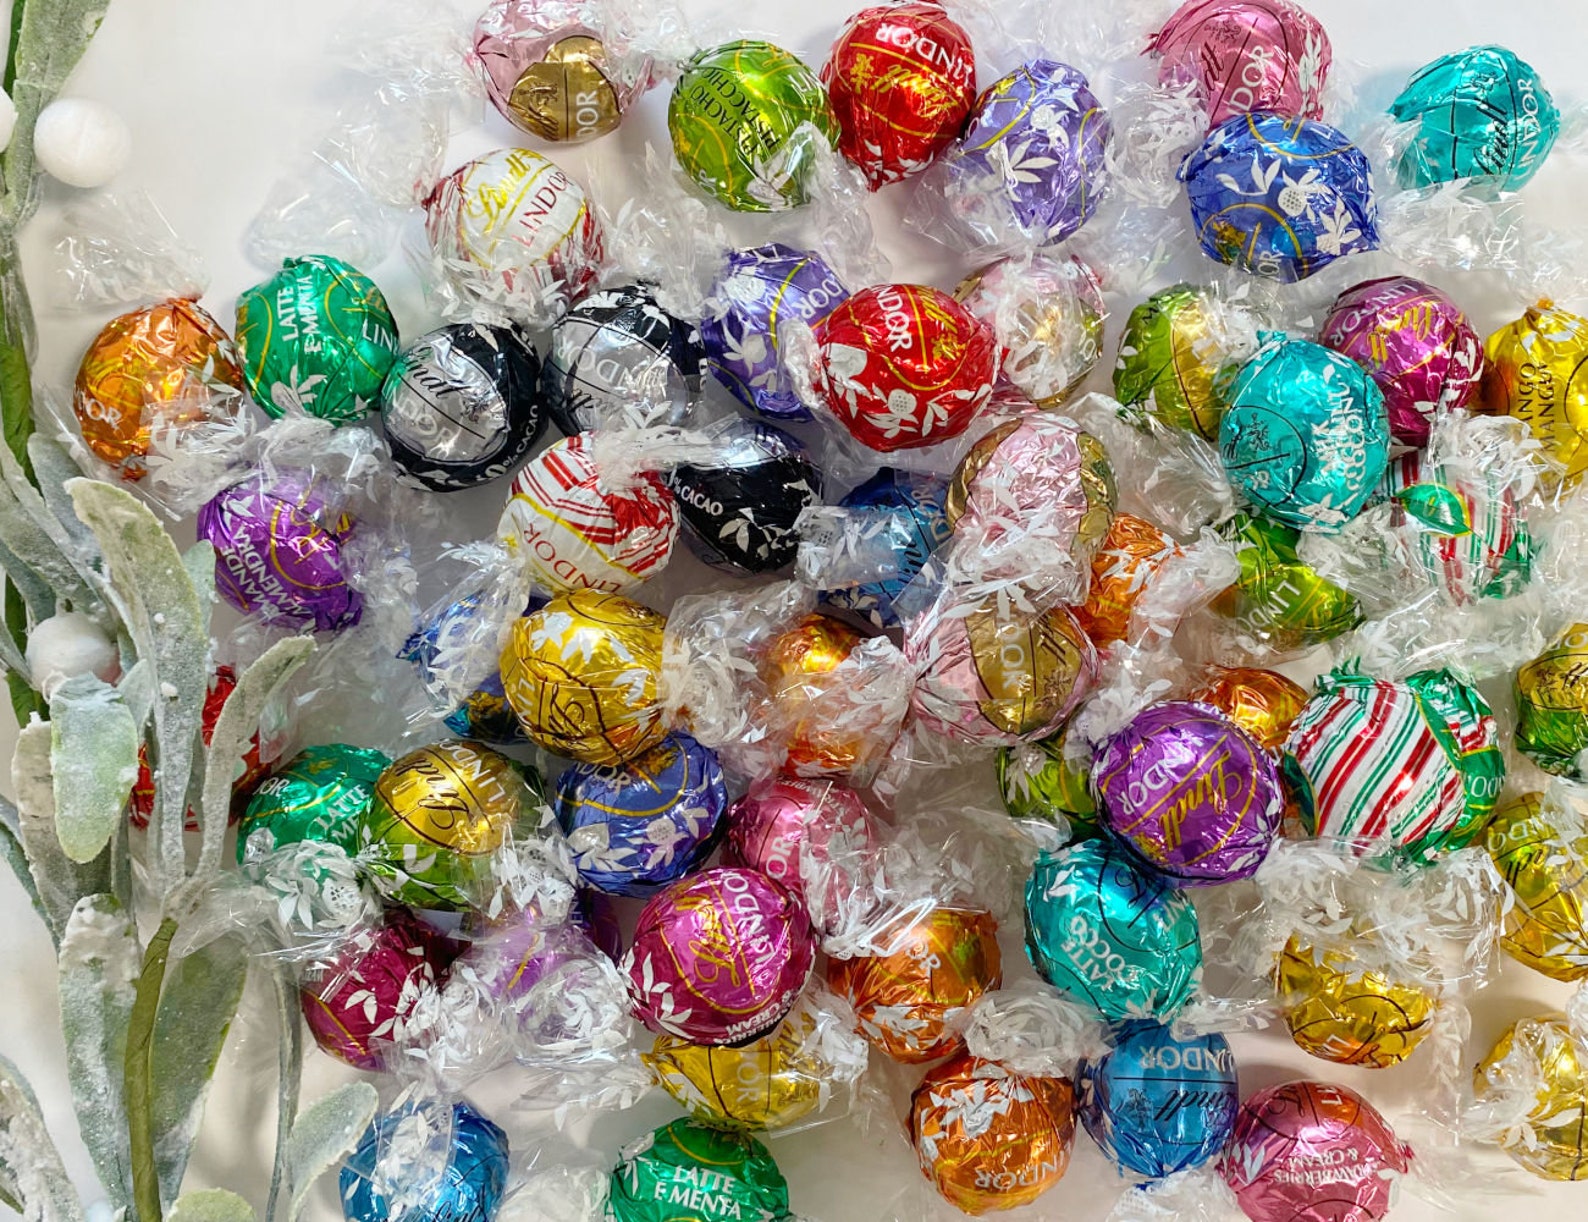 Lindt Lindor Chocolate Truffles Lindt Chocolate Gifts Pick - Etsy UK